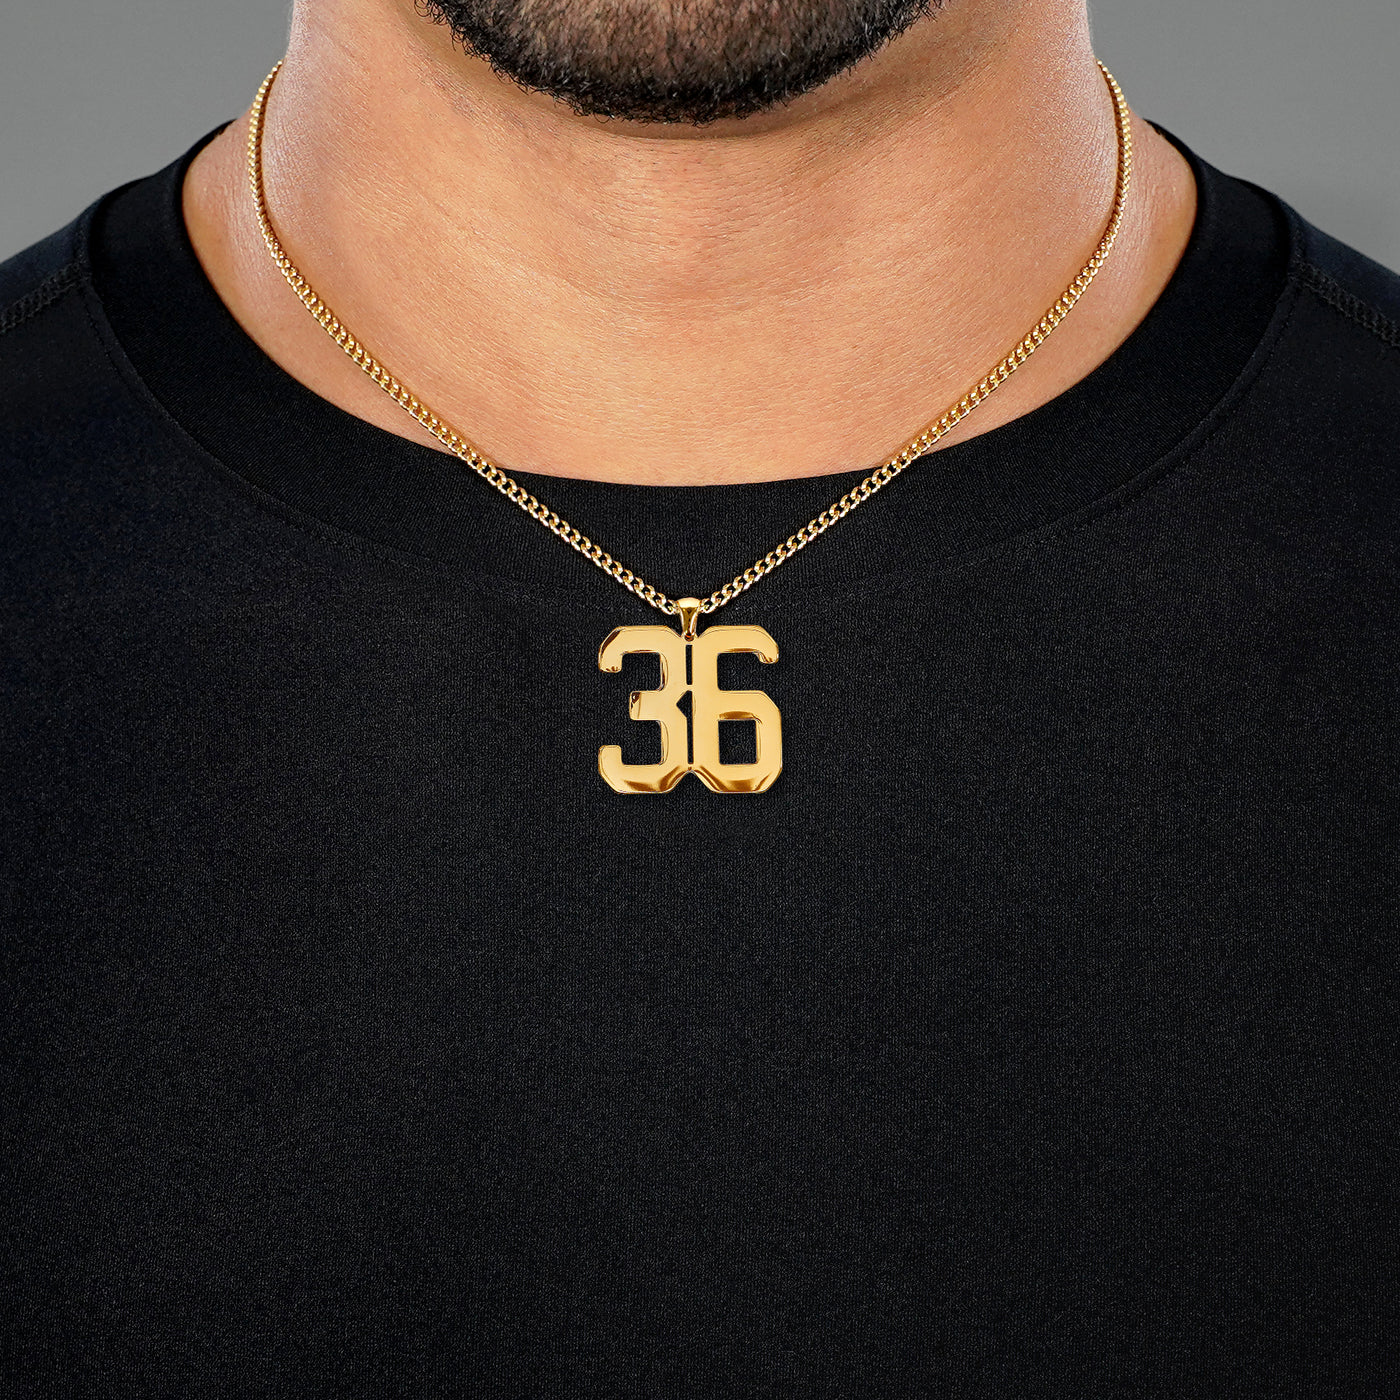 36 Number Pendant with Chain Necklace - Gold Plated Stainless Steel